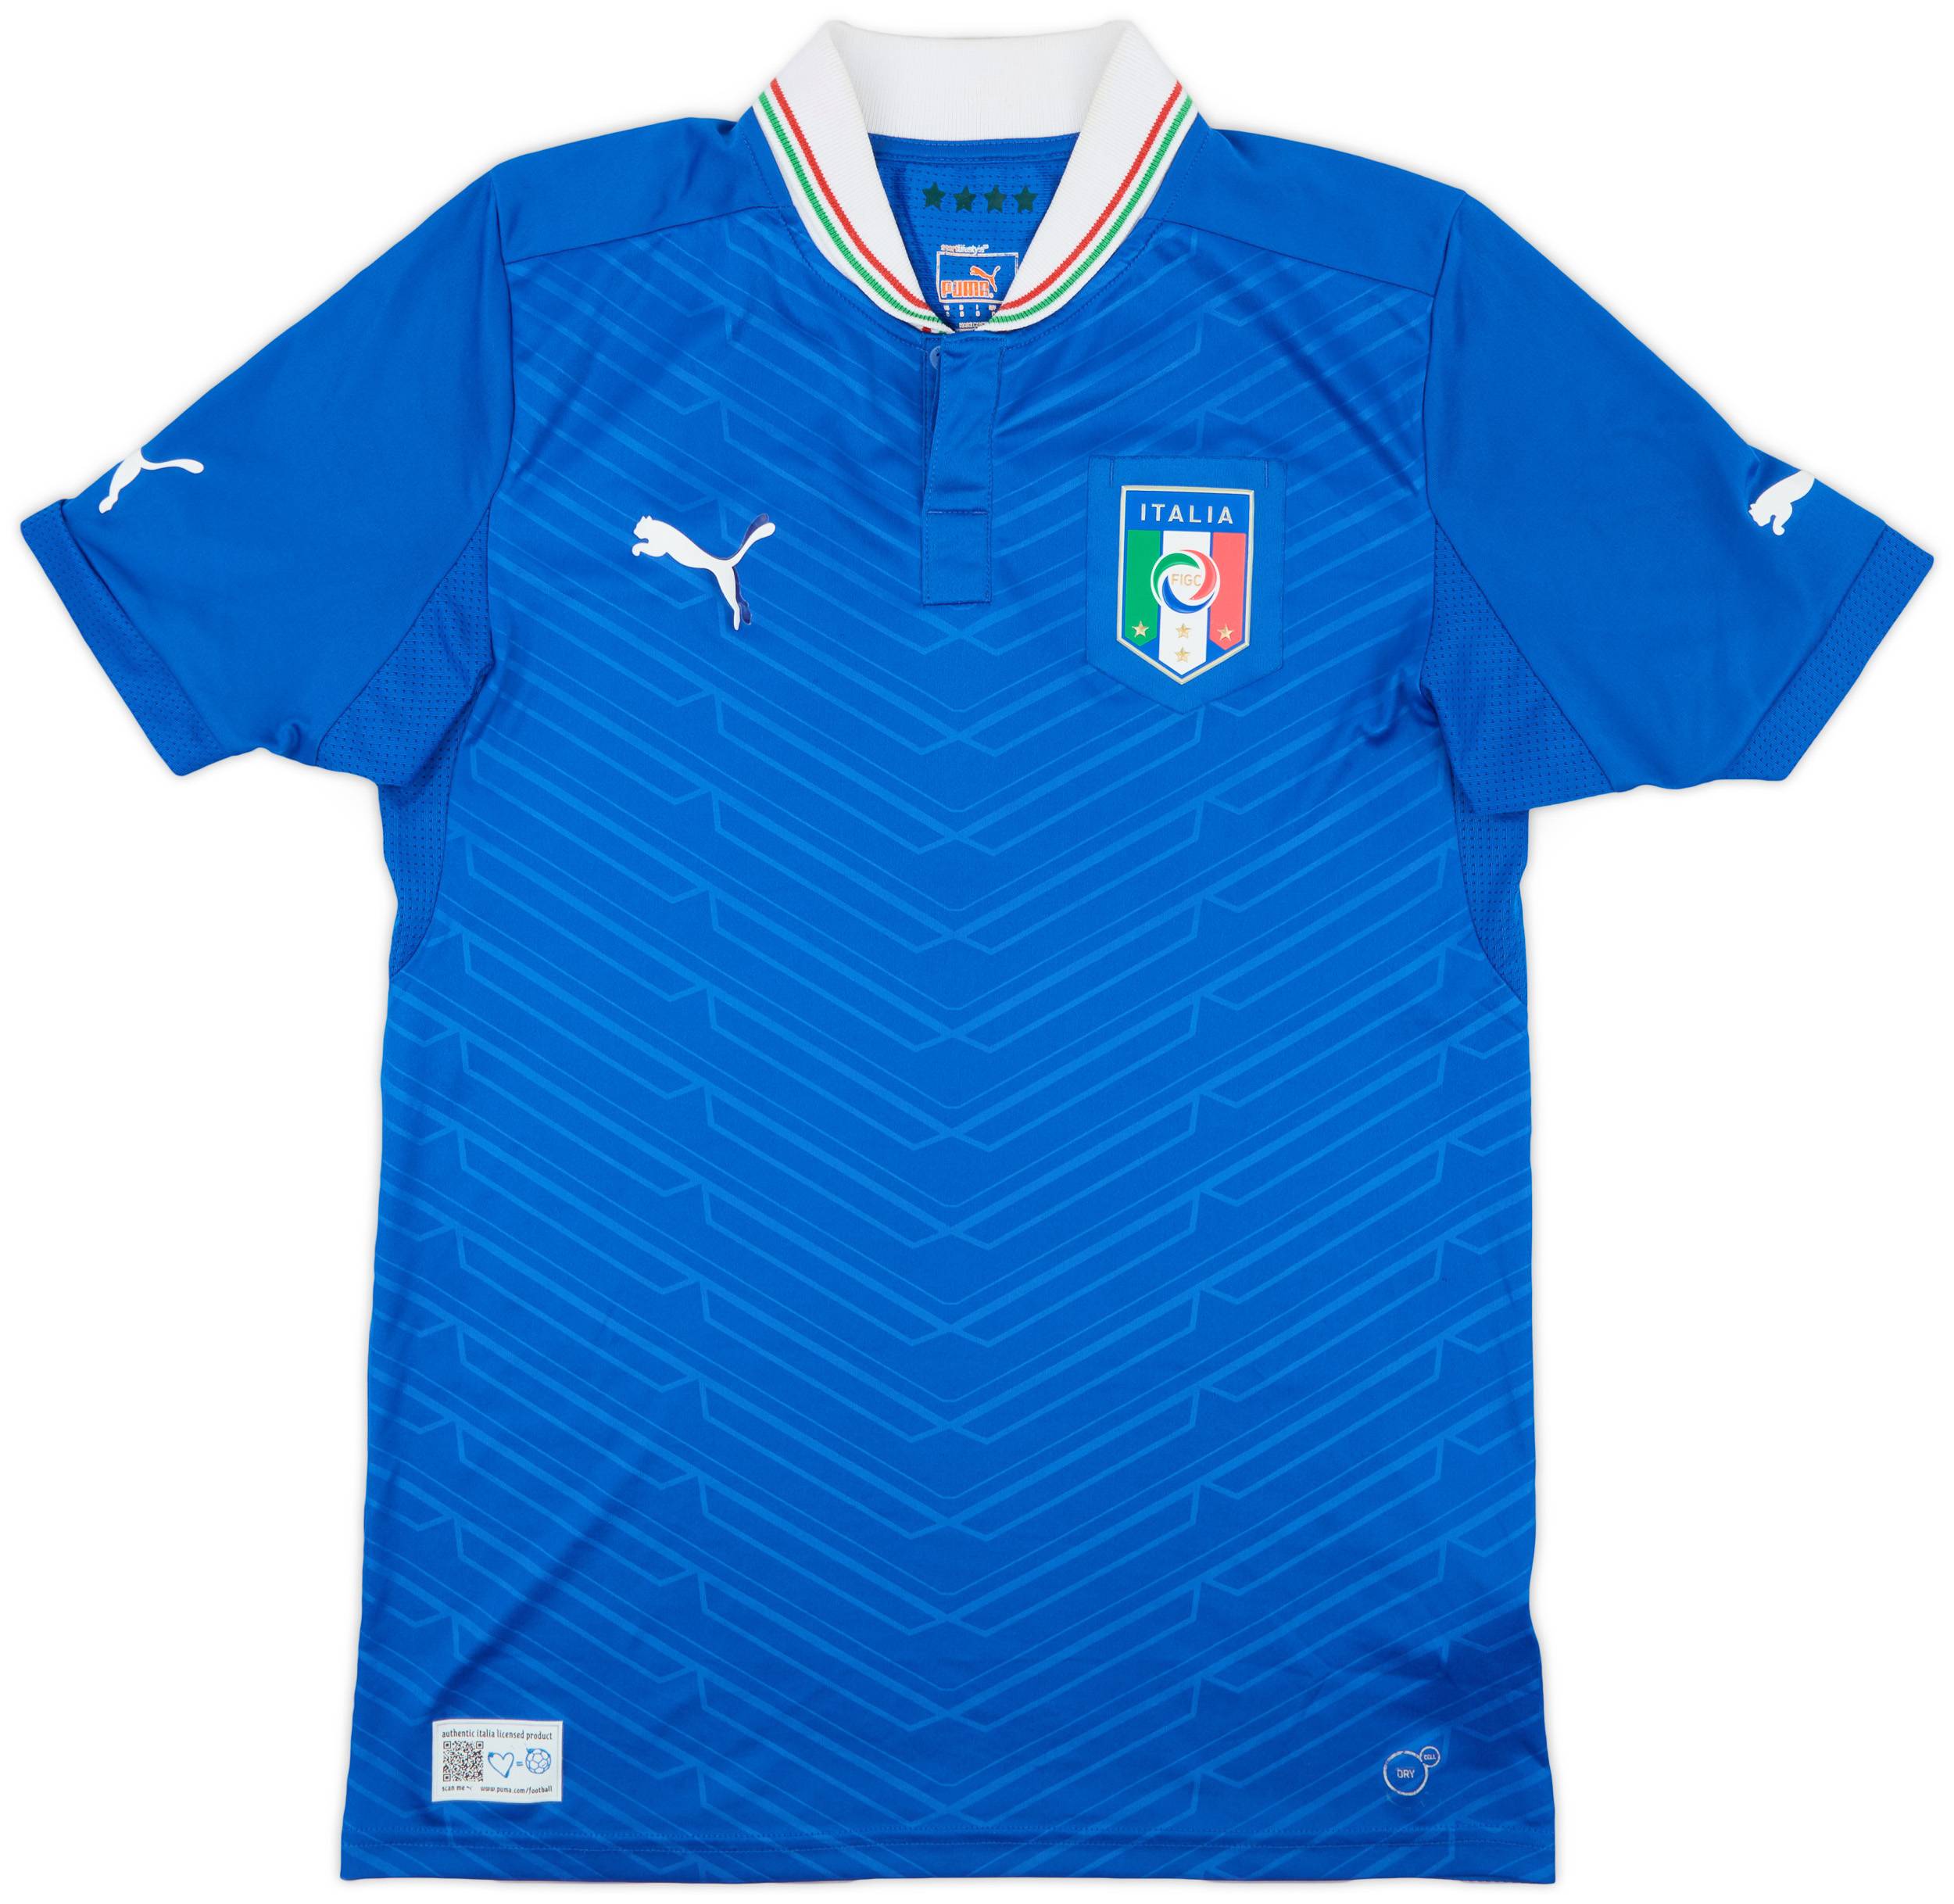 2012-13 Italy Home Shirt - 5/10 - (S)